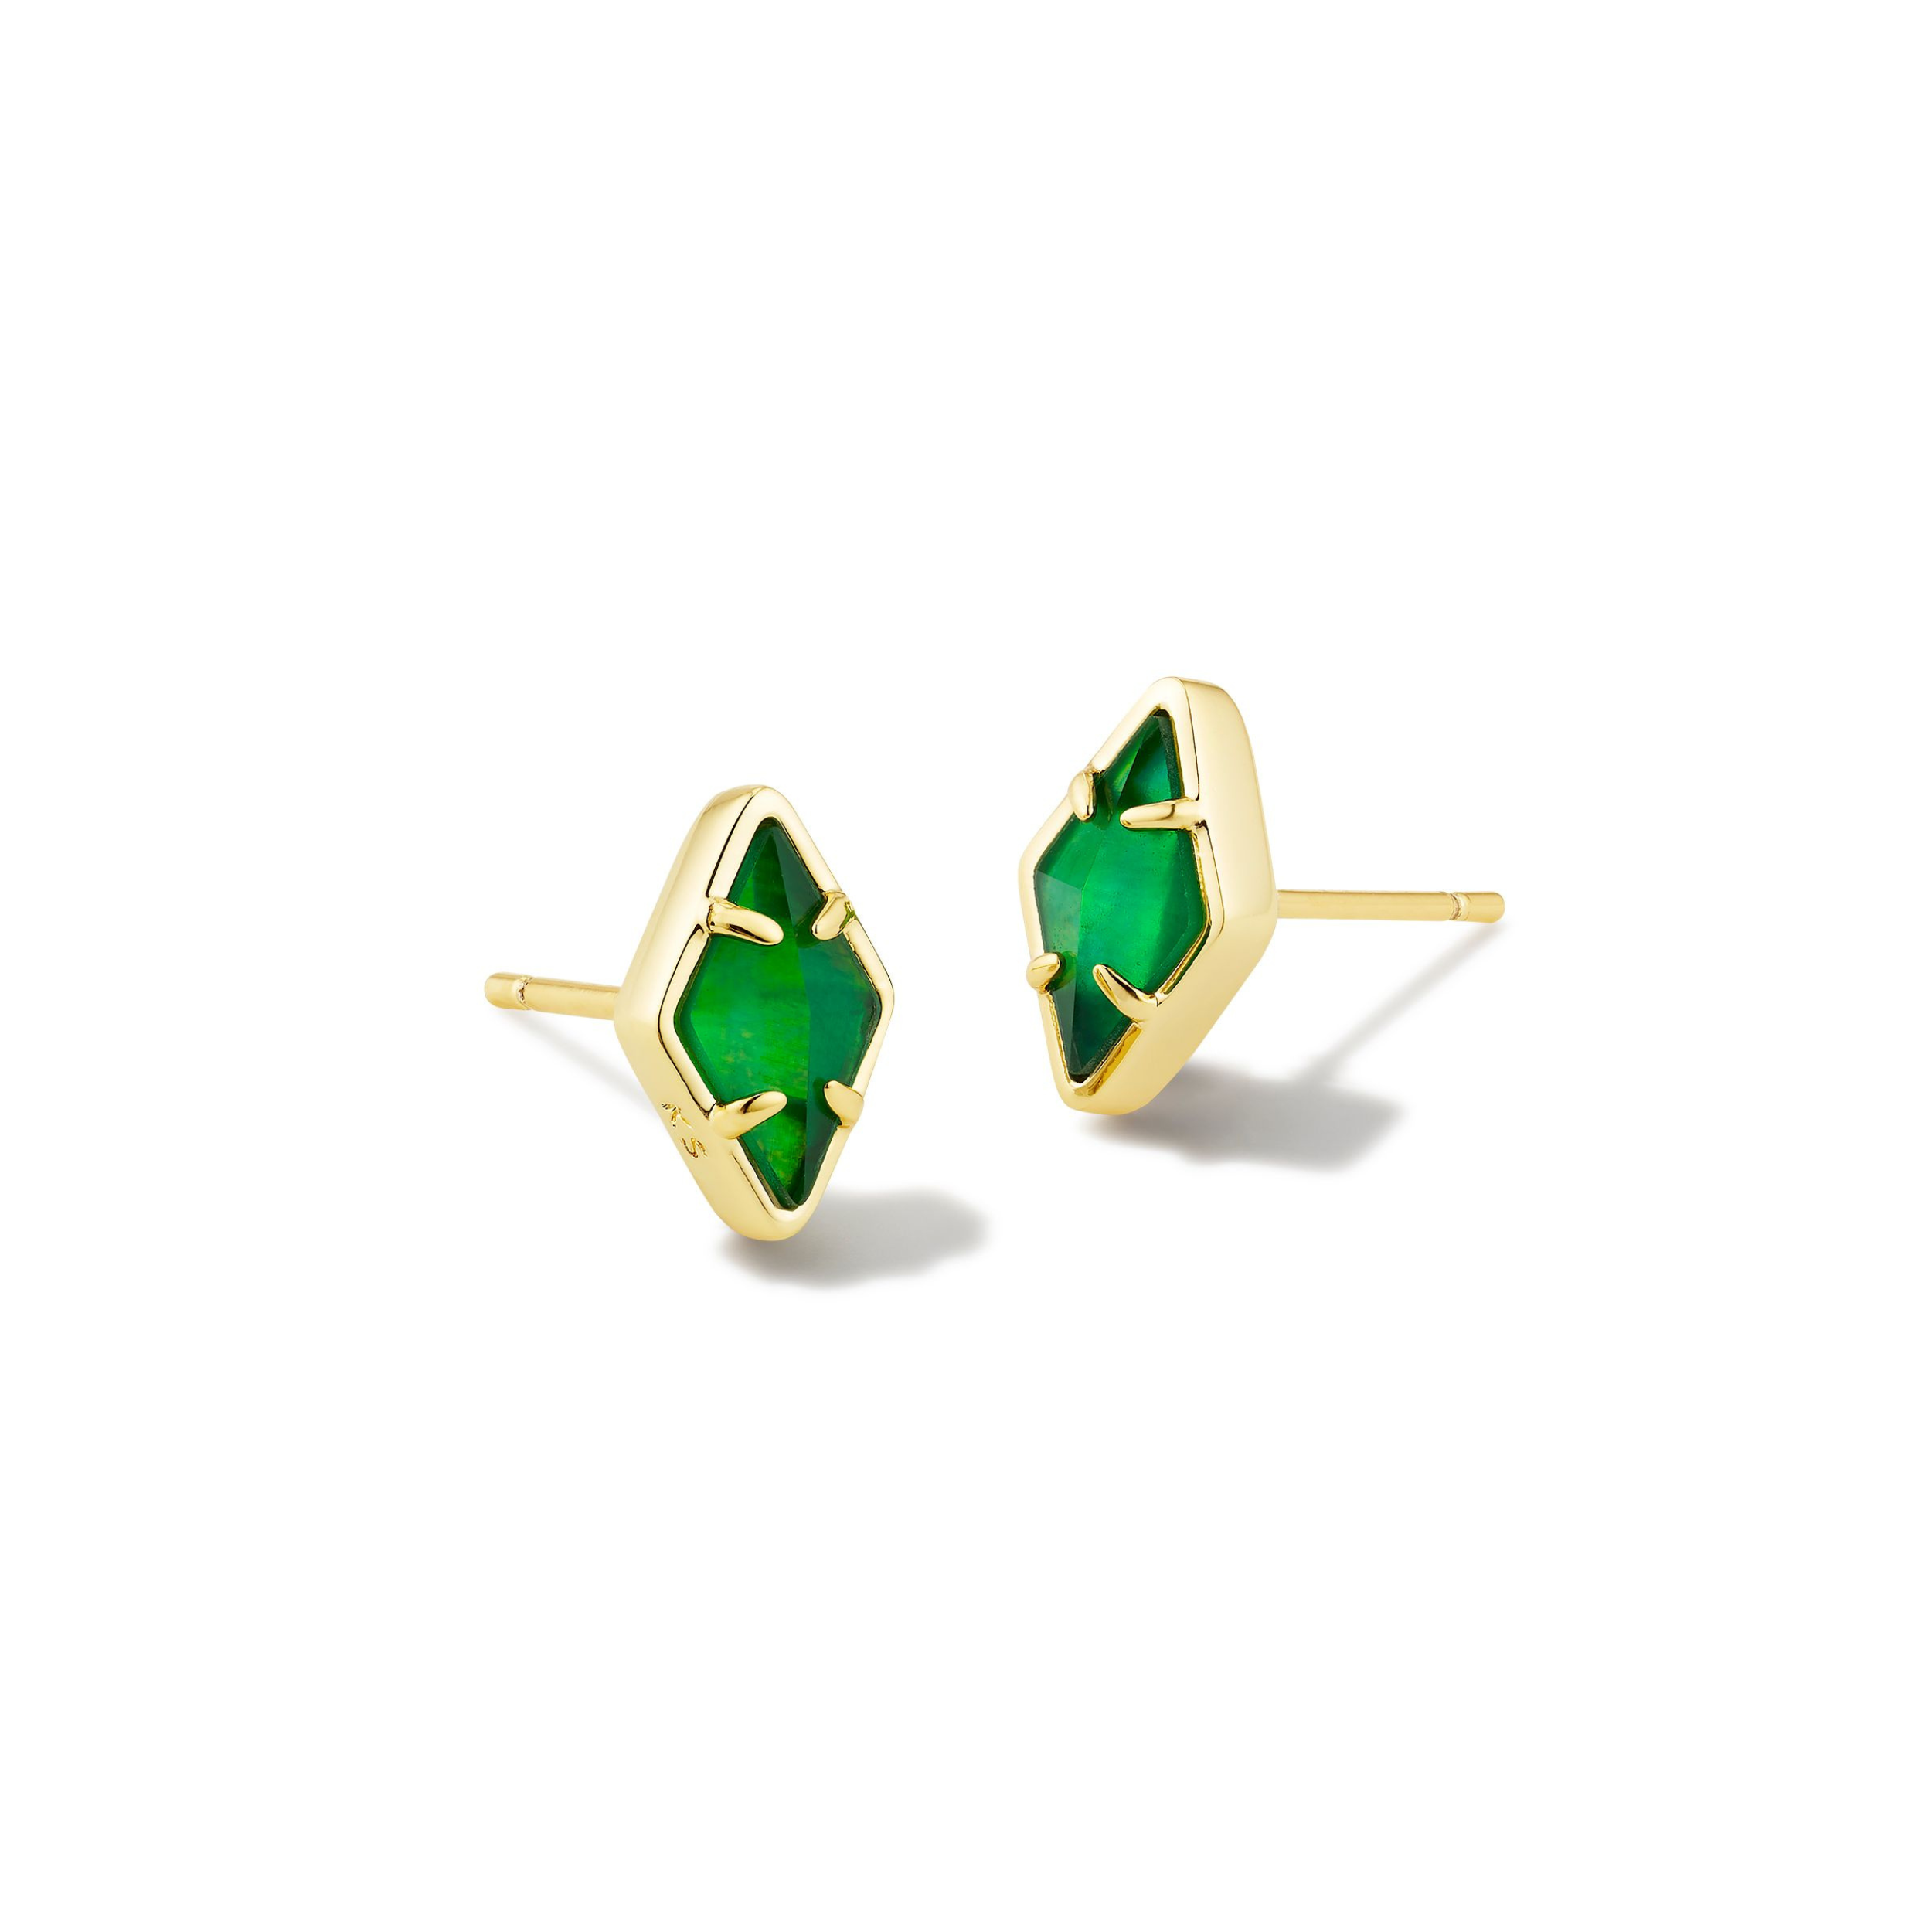 Pictured on a white background is a pair of gold, diamond shaped stud earrings with kelly green stones. 